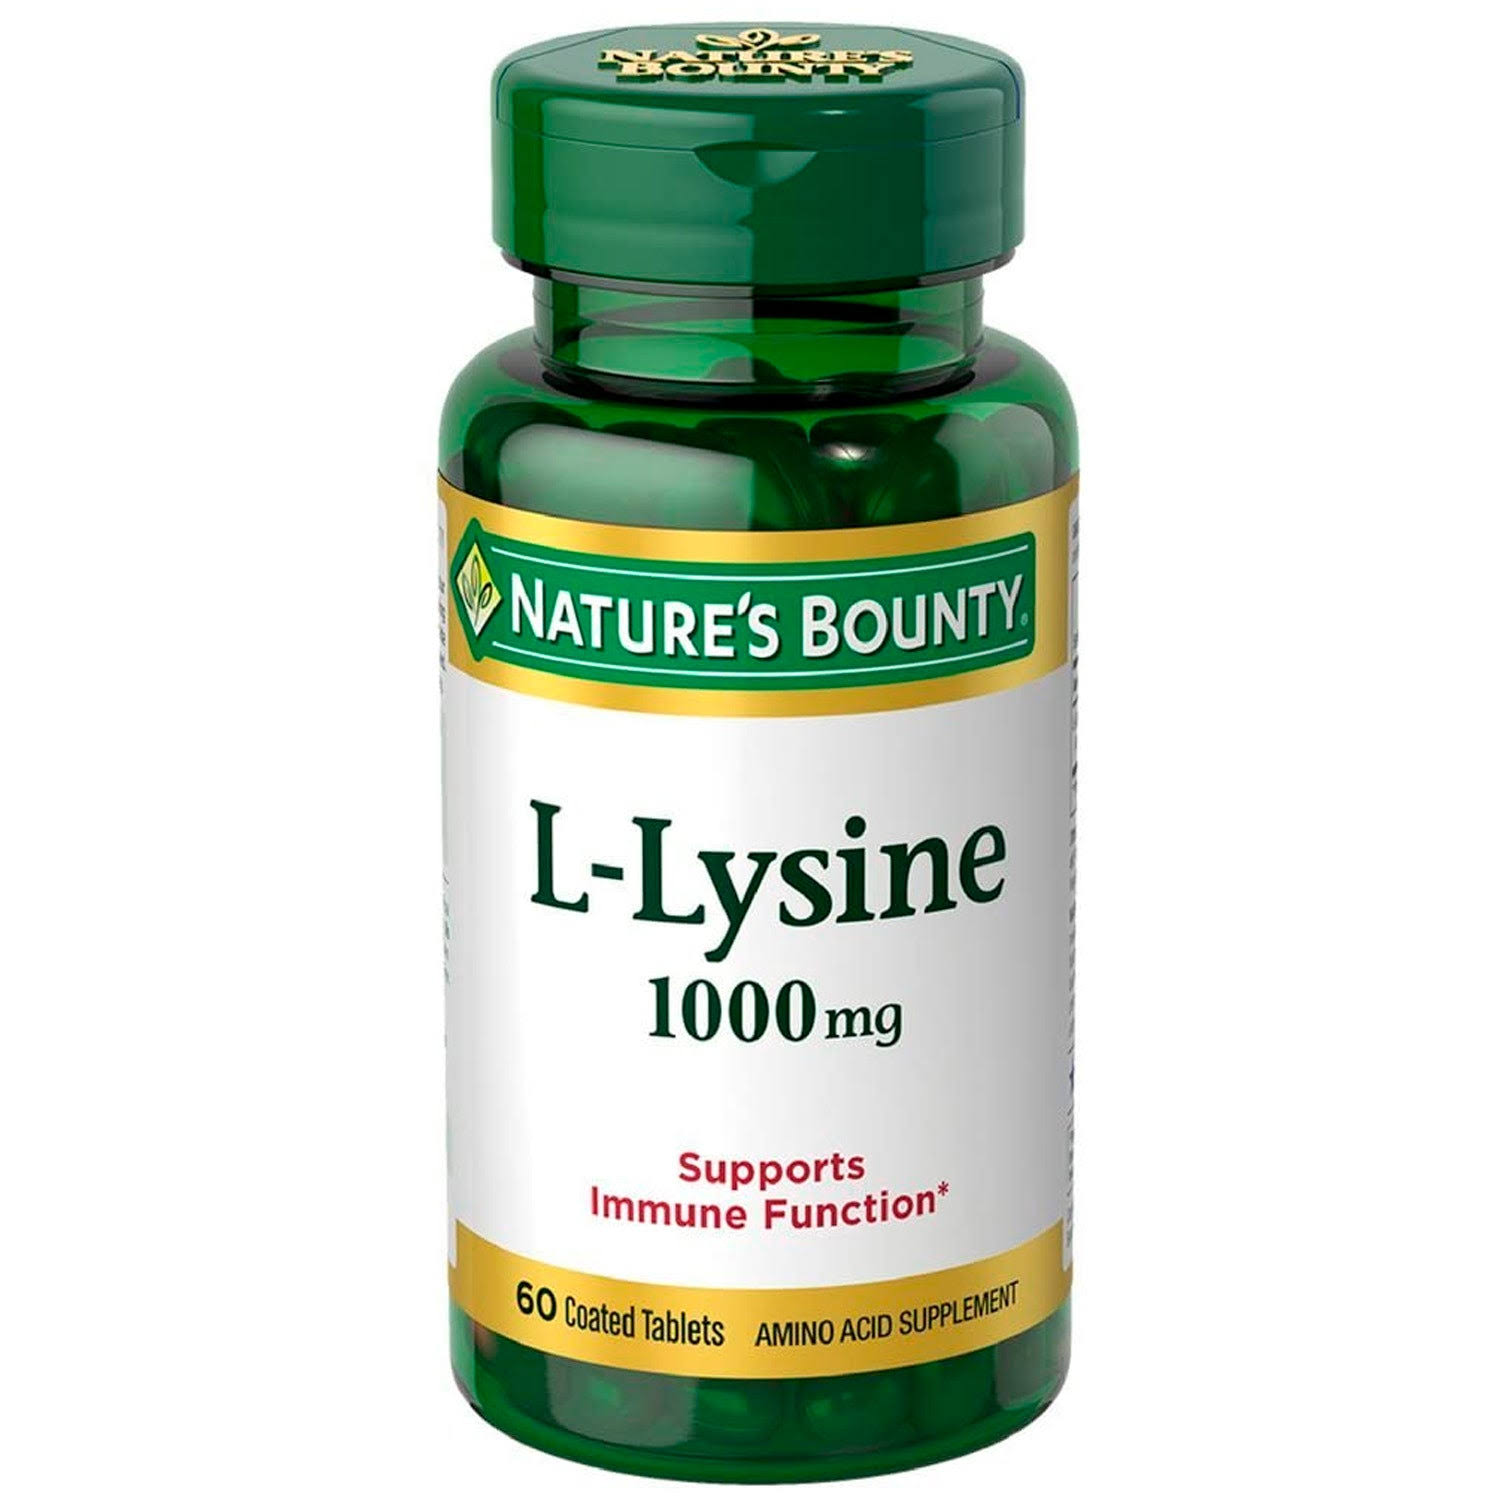 Nature's Bounty L-Lysine Supplement - 100mg, 60 Tabs